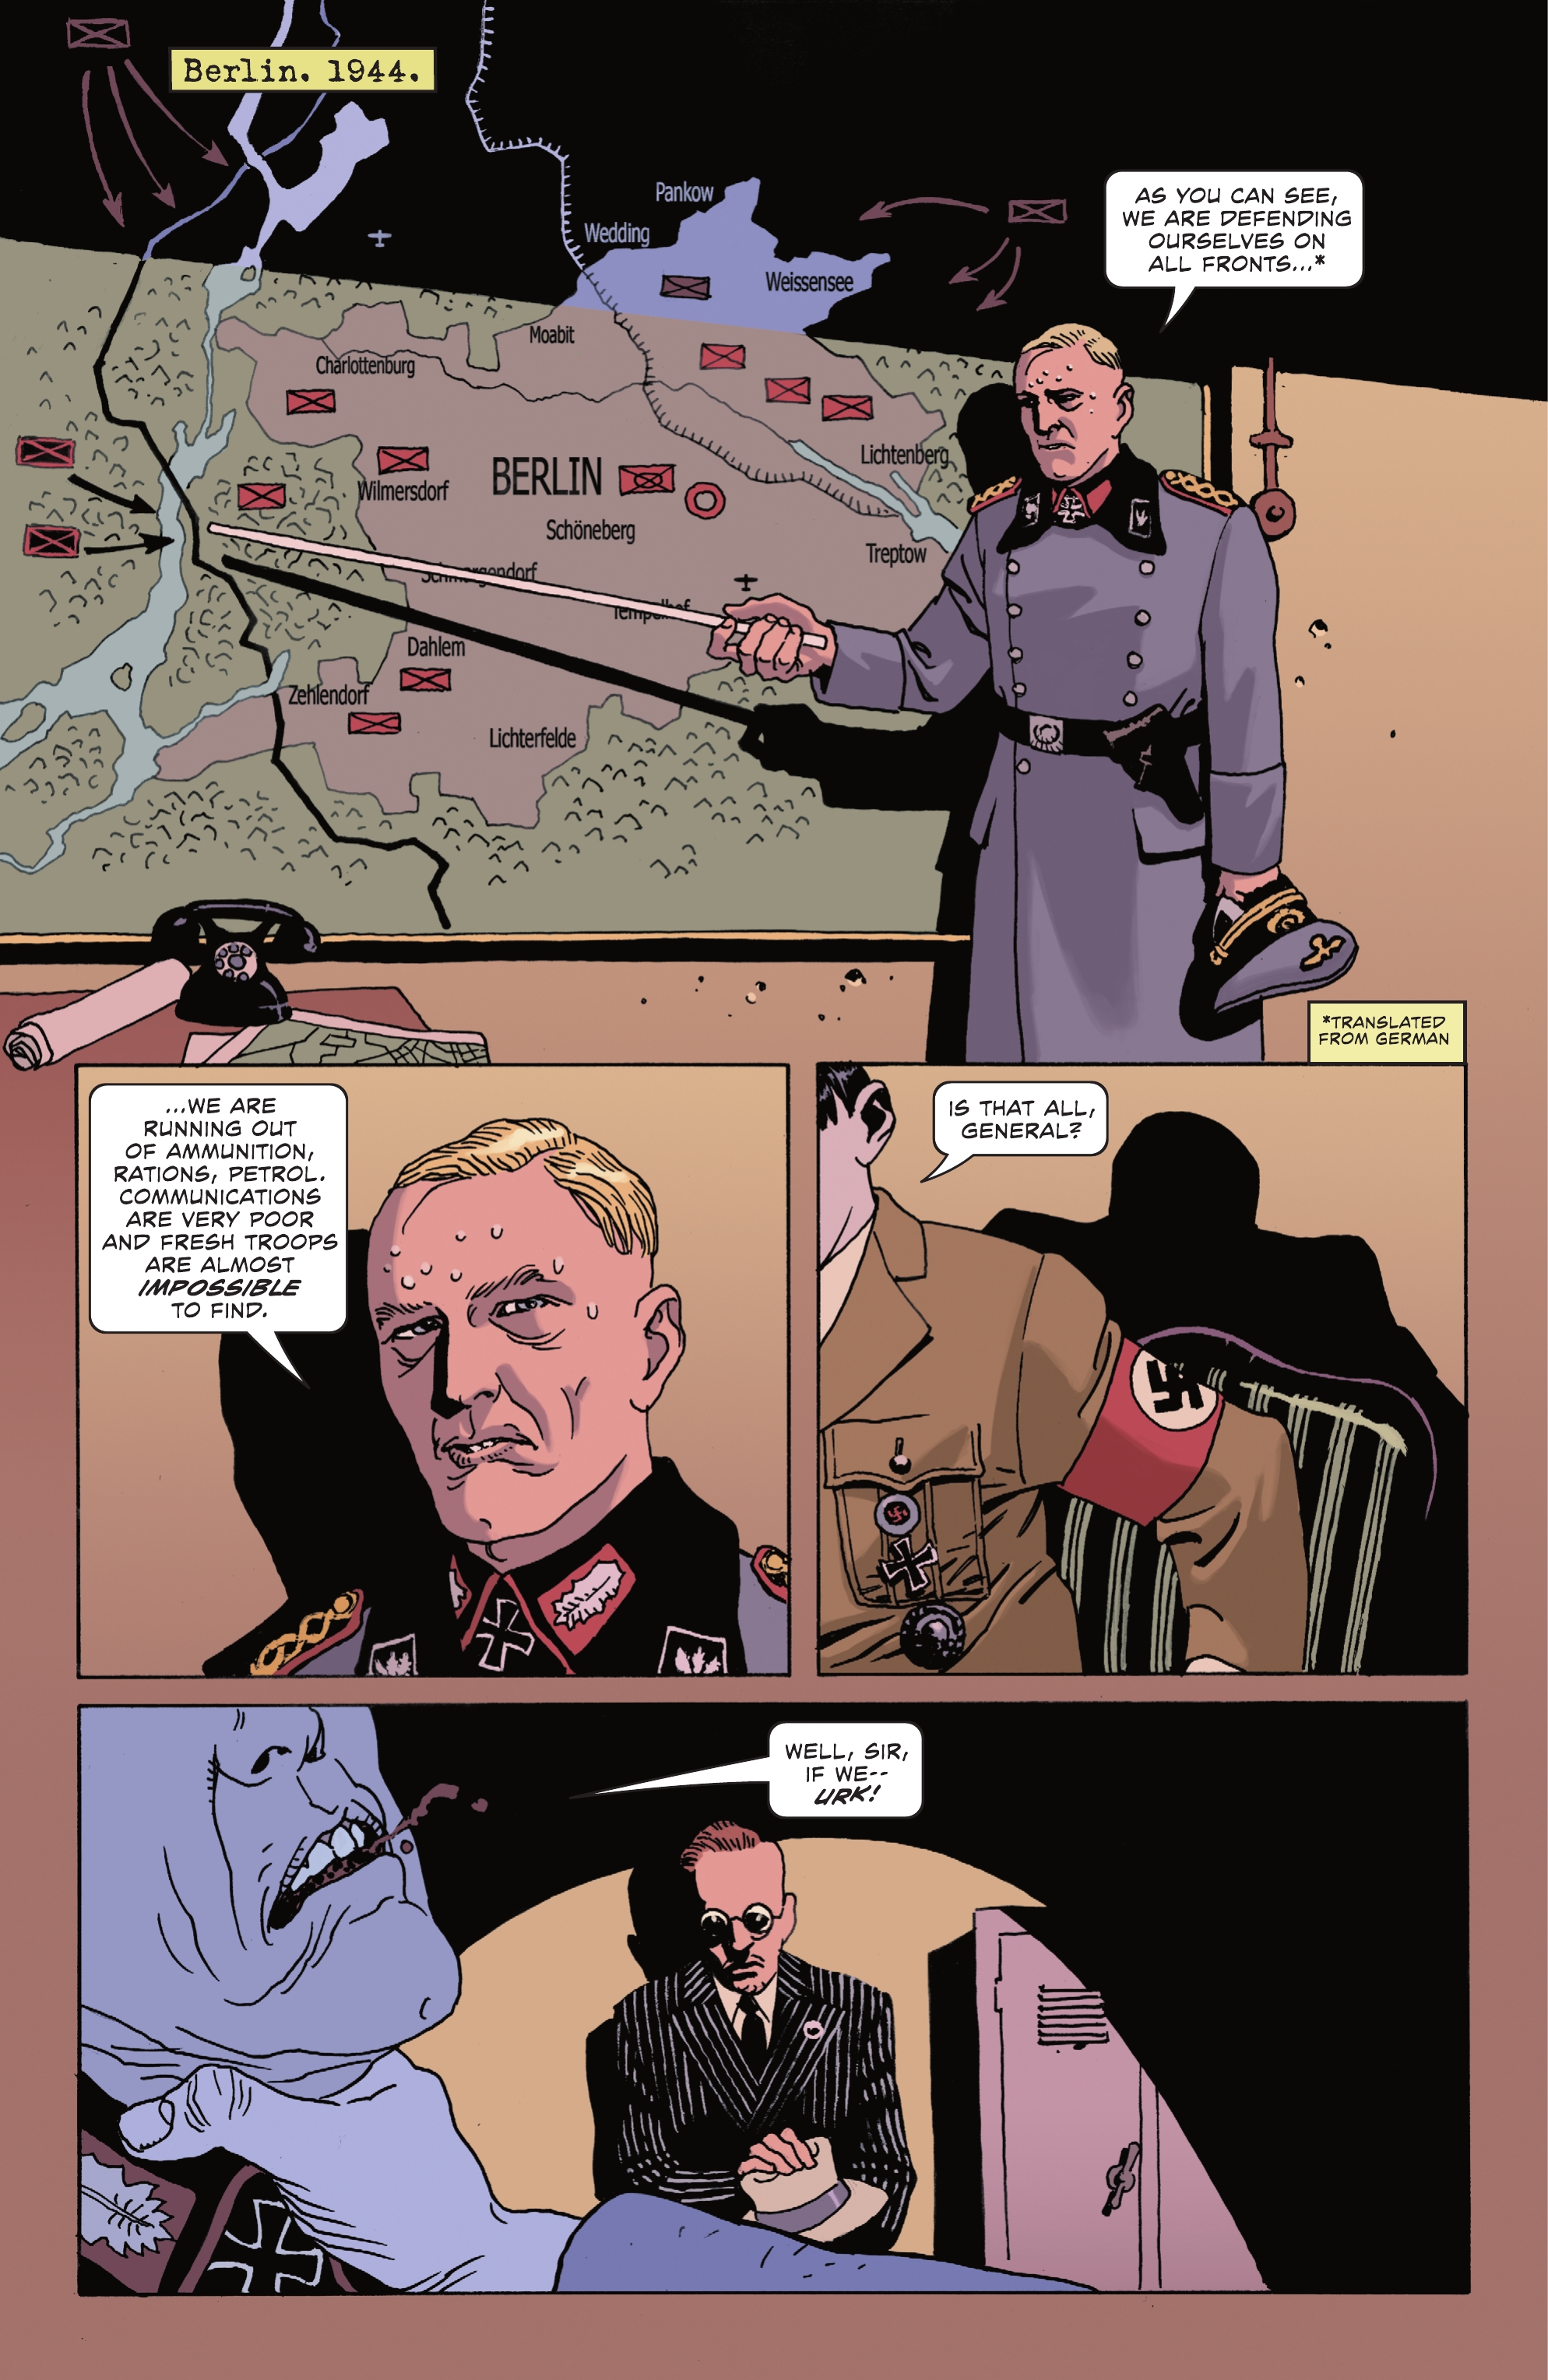 DC Horror Presents: Sgt. Rock vs. The Army of the Dead (2022-): Chapter 1 - Page 3